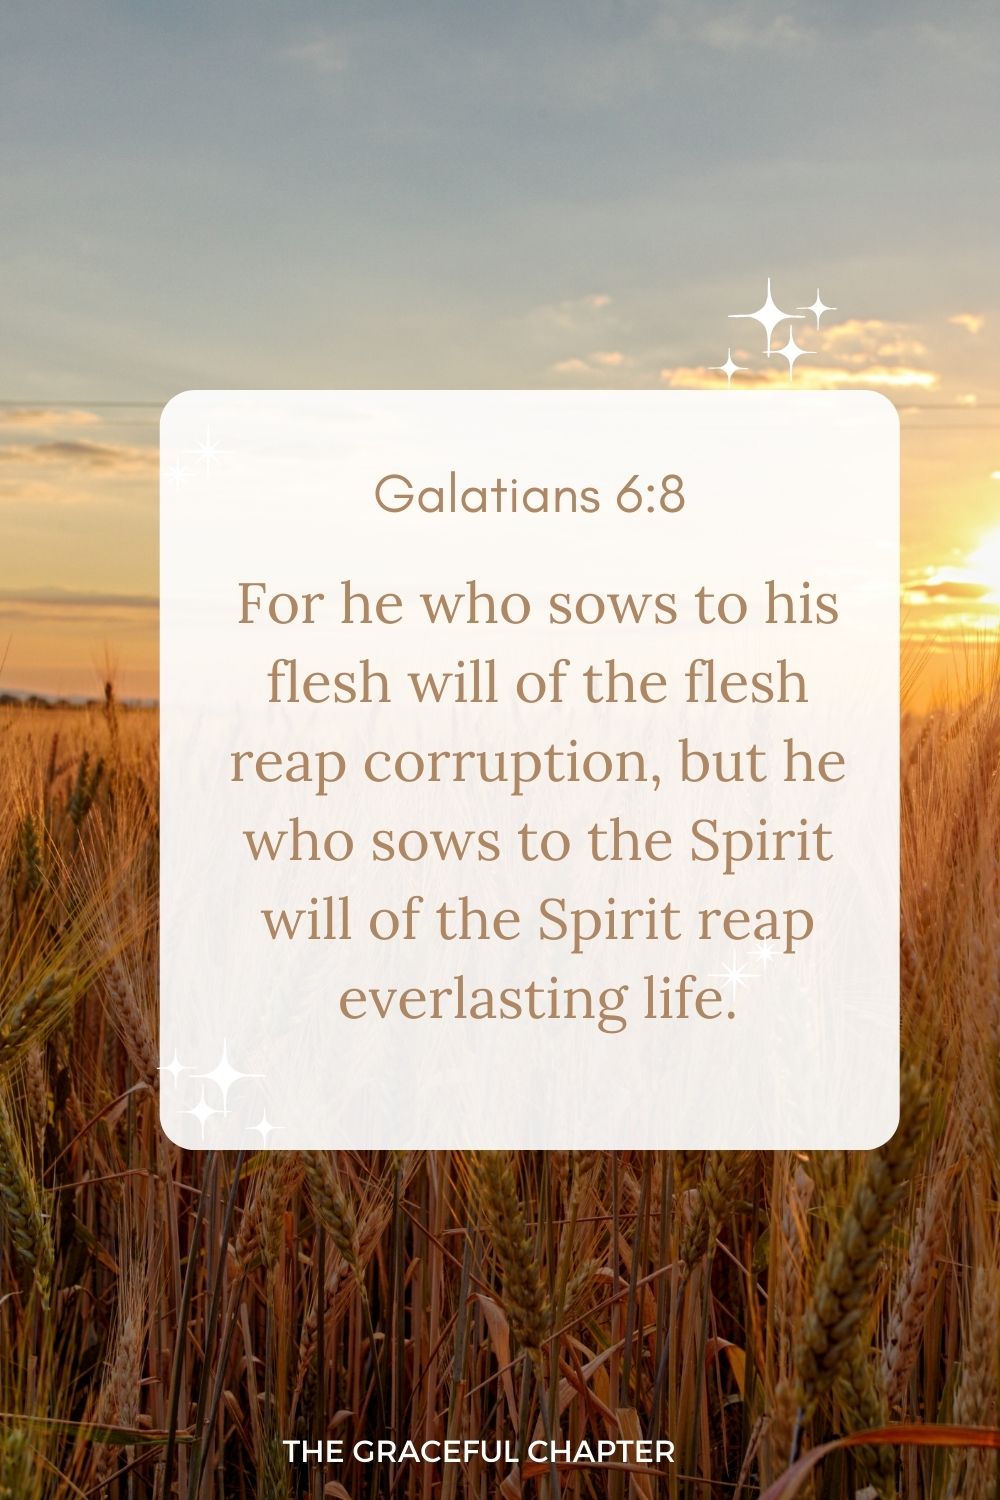 For he who sows to his flesh will of the flesh reap corruption, but he who sows to the Spirit will of the Spirit reap everlasting life. Galatians 6:8